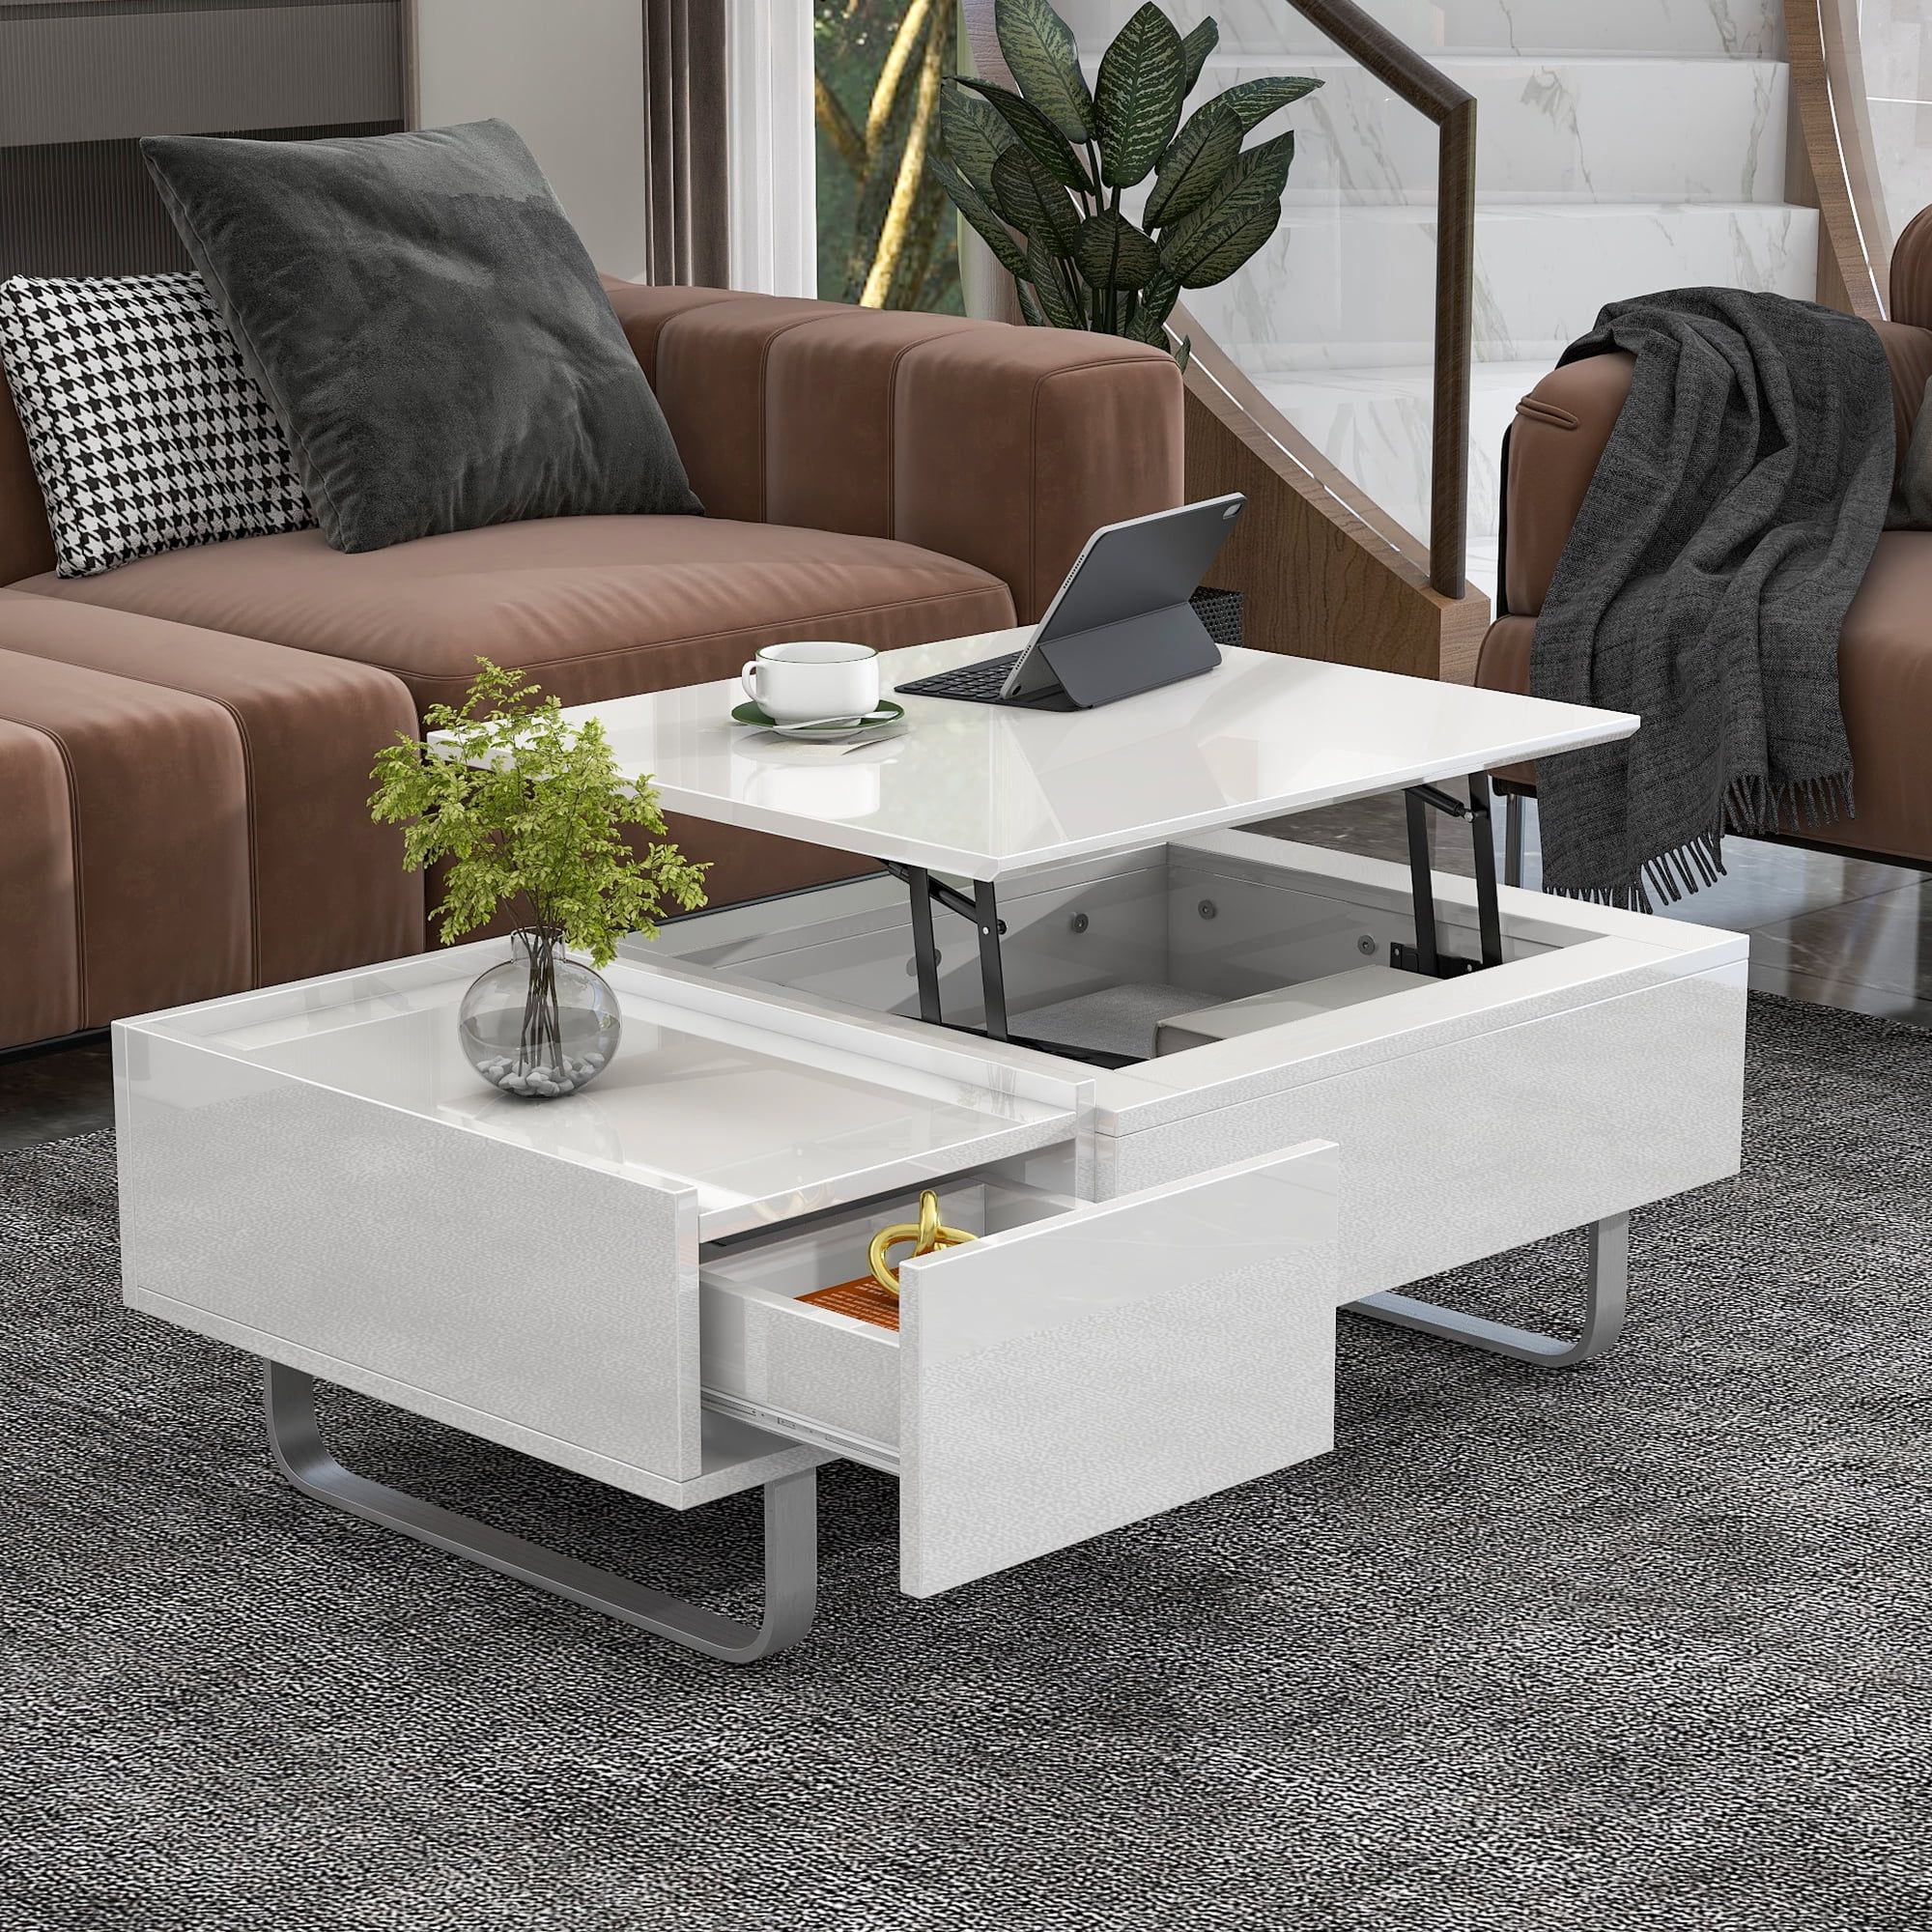 High Gloss Lift Top Coffee Tables Throughout Newest Euroco Modern  (View 7 of 10)